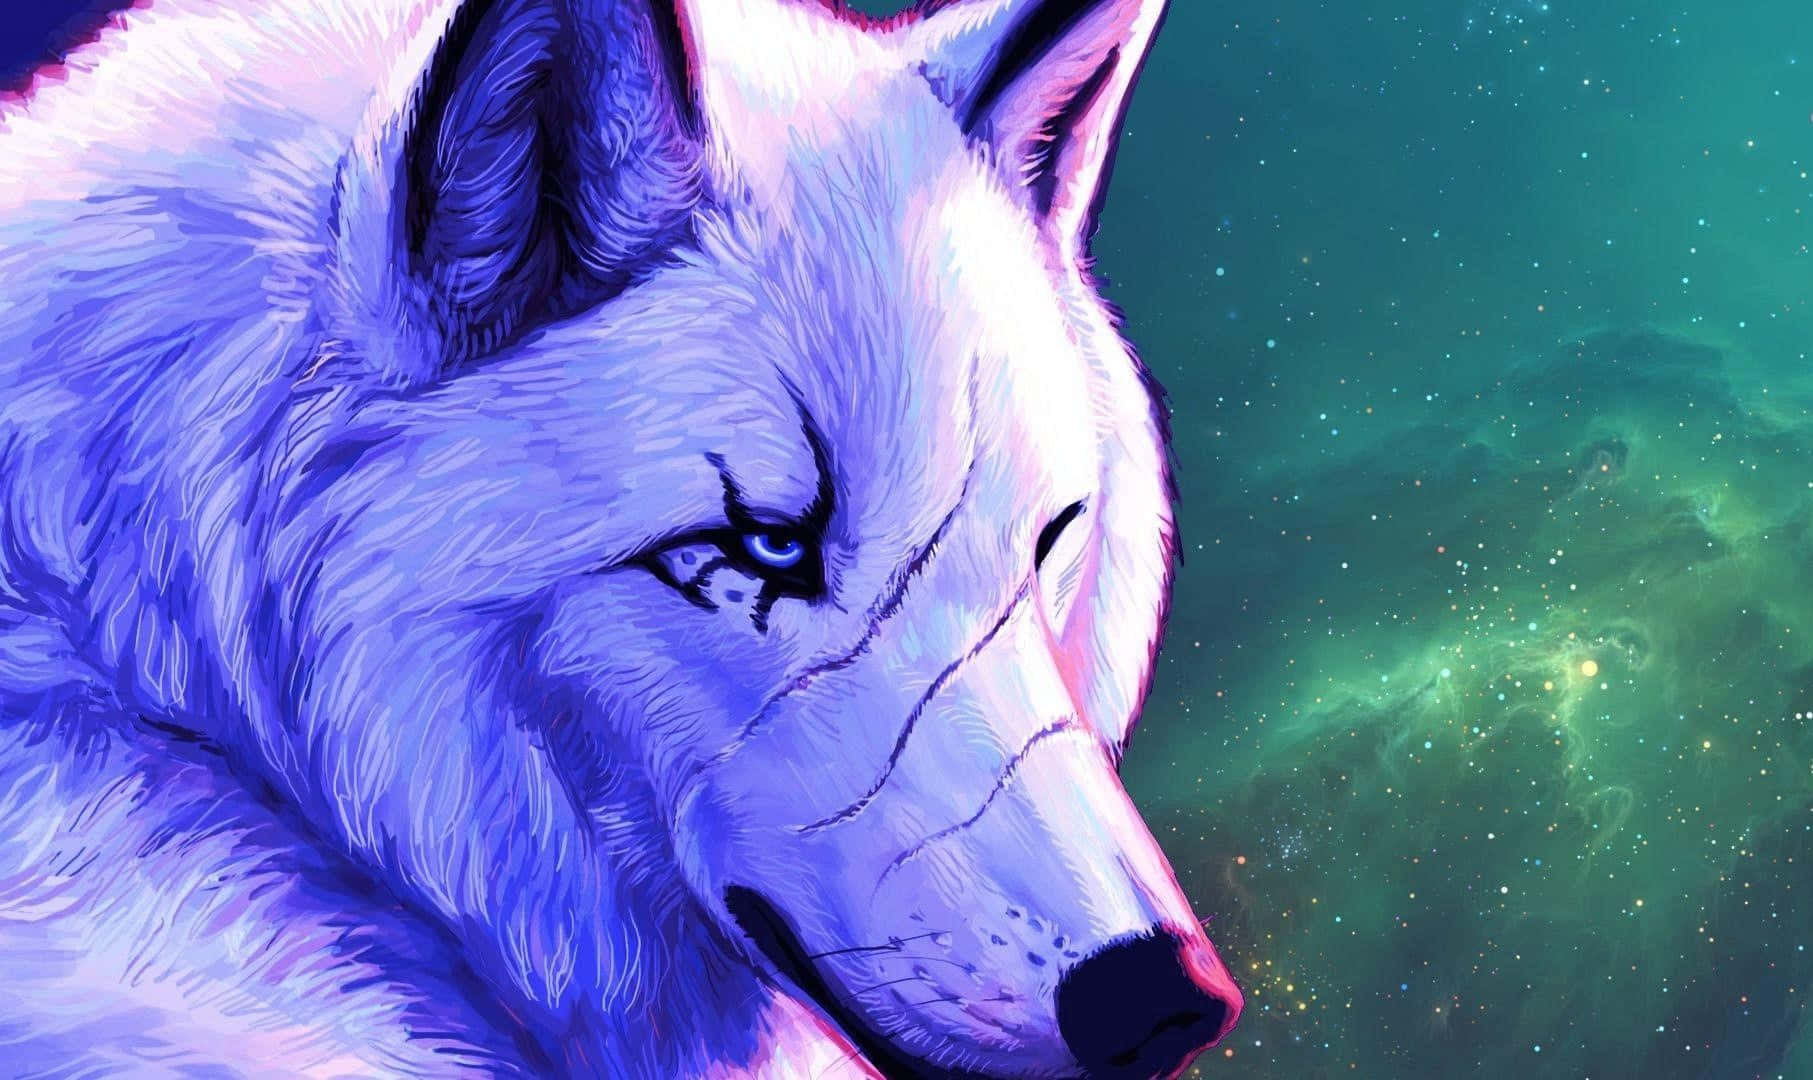 Download Majestic Lone Wolf in a 3D Fantasy World Wallpaper ...